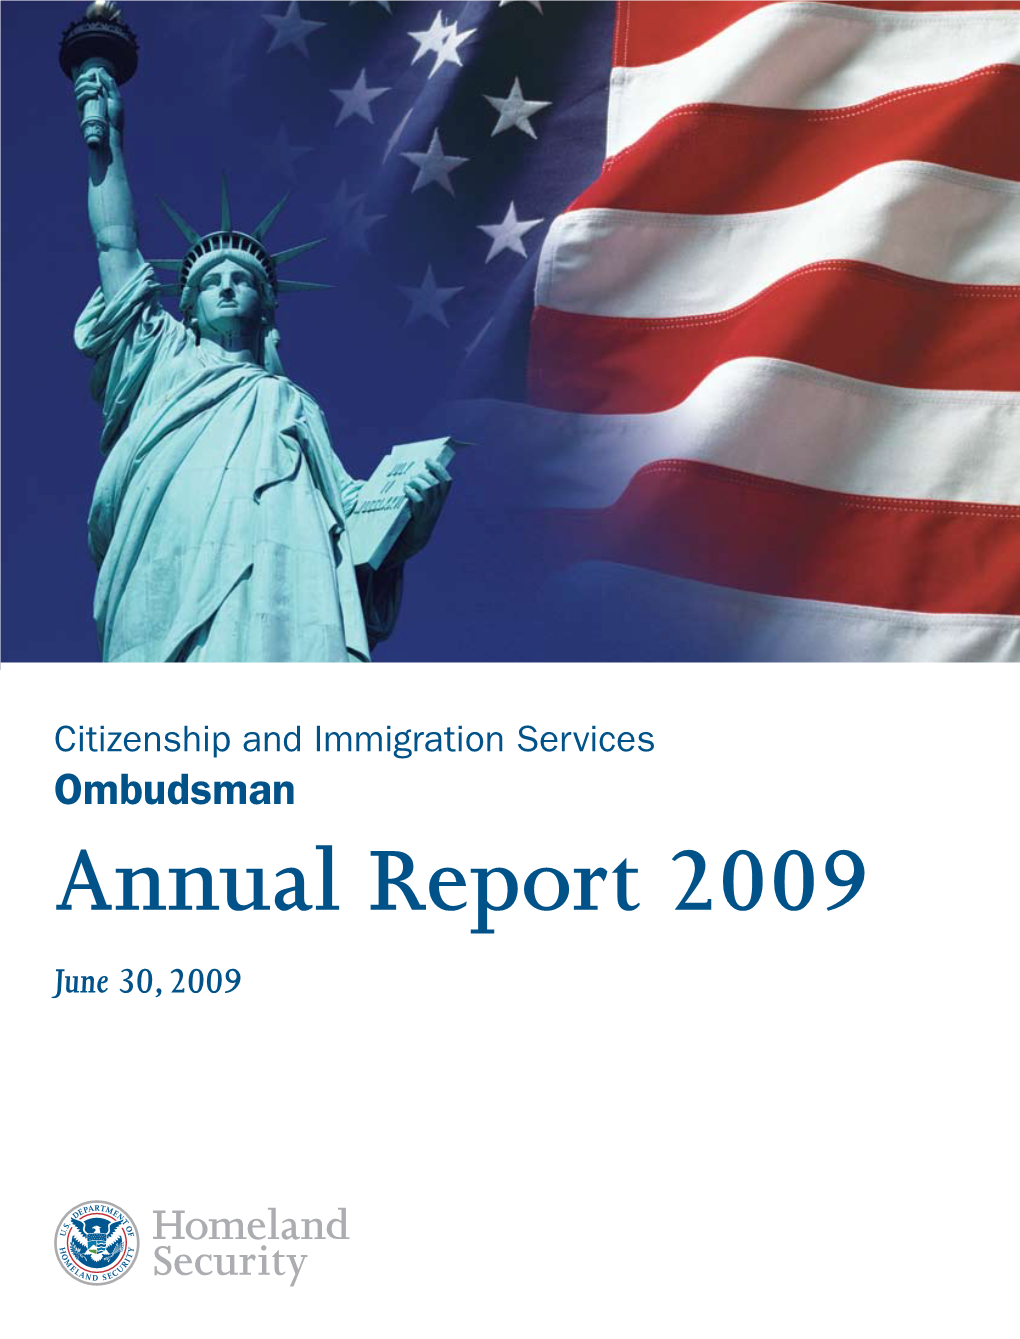 Department of Homeland Security CIS Ombudsman 2009 Annual Report to Congress